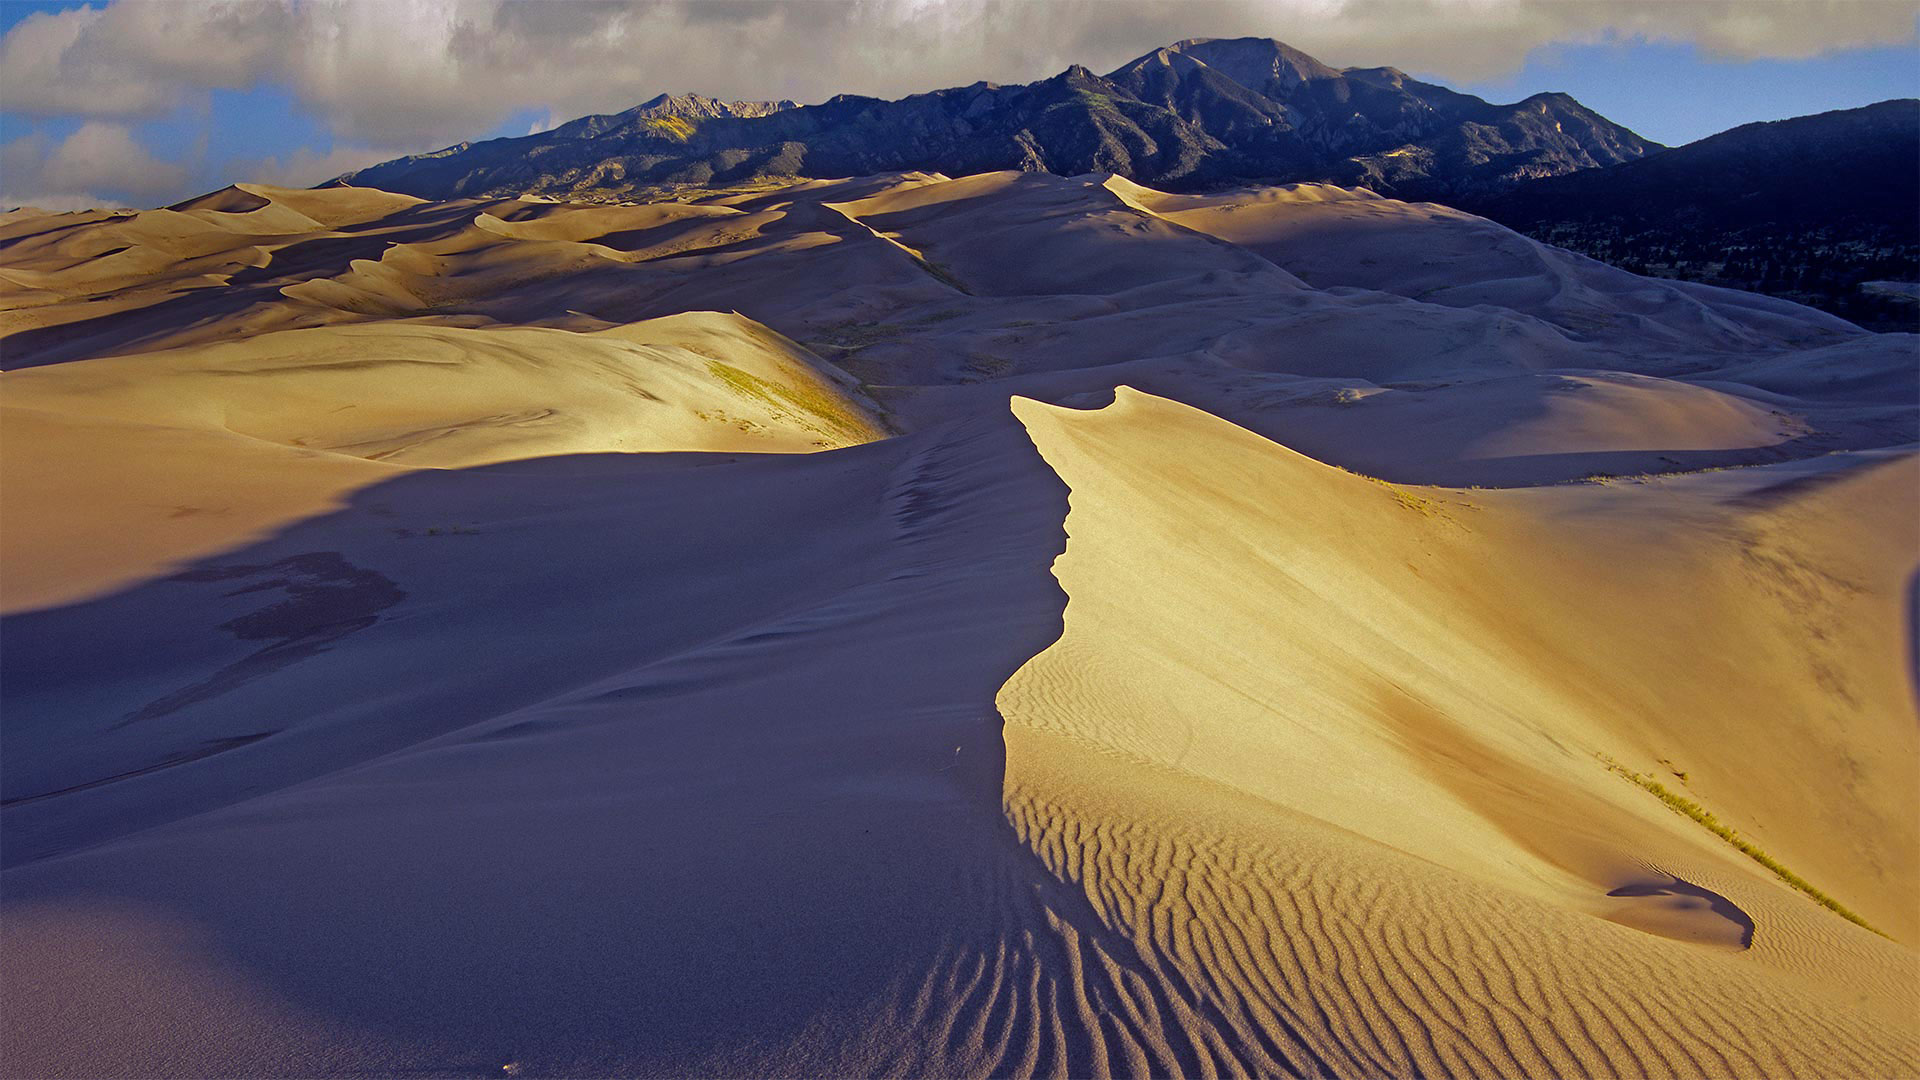 Sand dunes with Sangre de Cristo Mountains in the background, Great Sand Dunes National Park and Preserve, Colorado - Tim Fitzharris